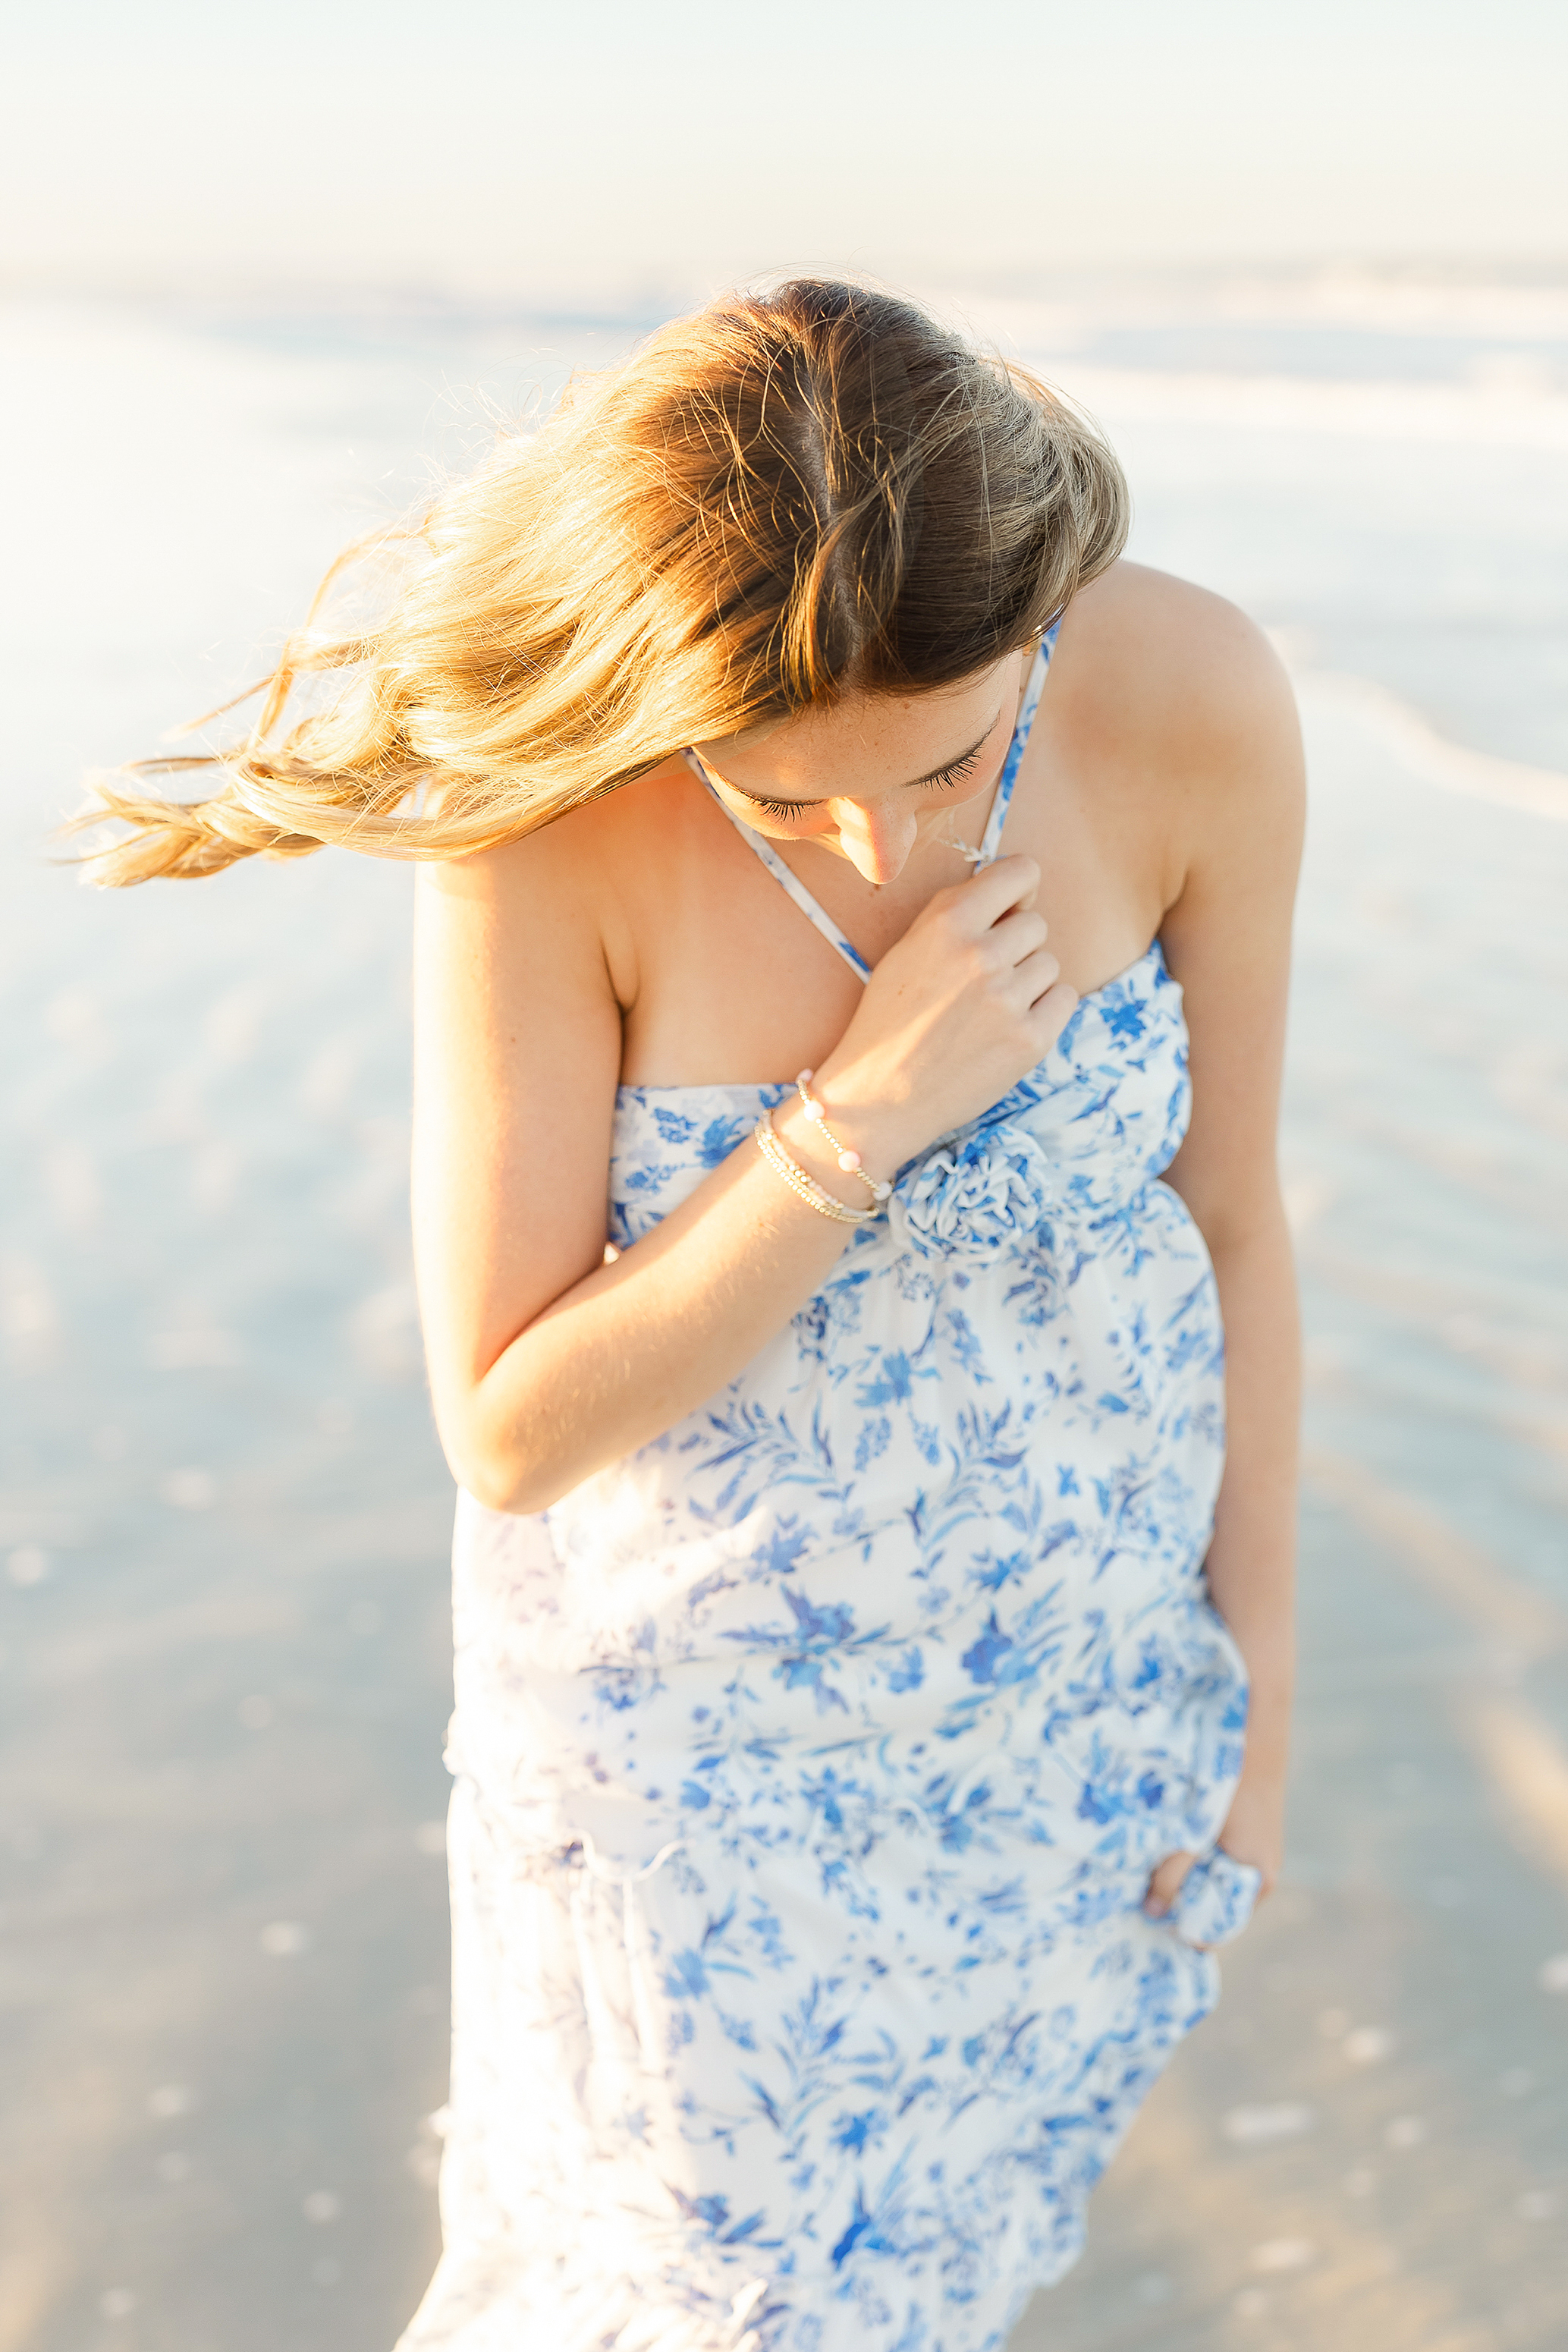 A young woman holds her necklace in warm sunlight on the sand.